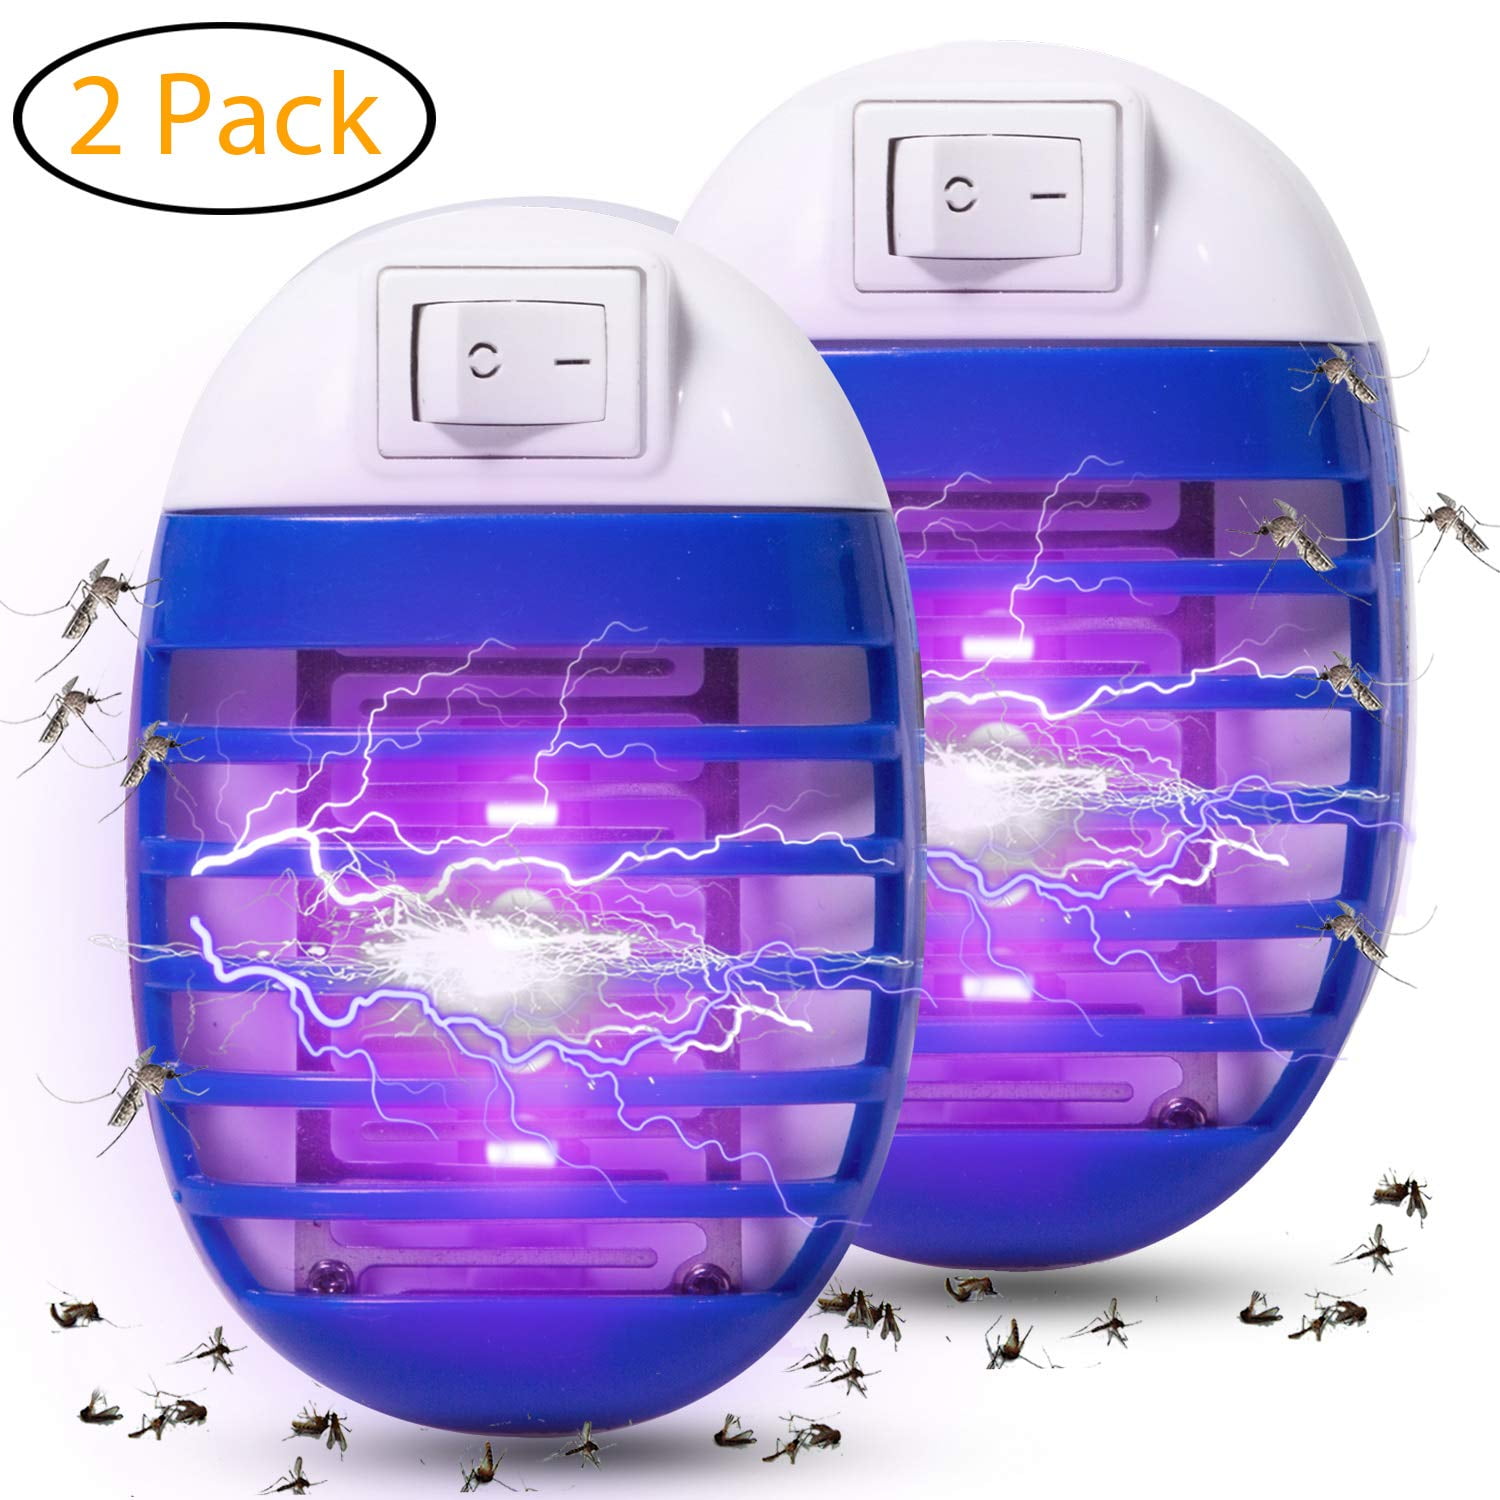 Details about   Indoor 3D Mosquito Killer Light No Radiation Fly Zapper Insect Trap Catcher Lamp 